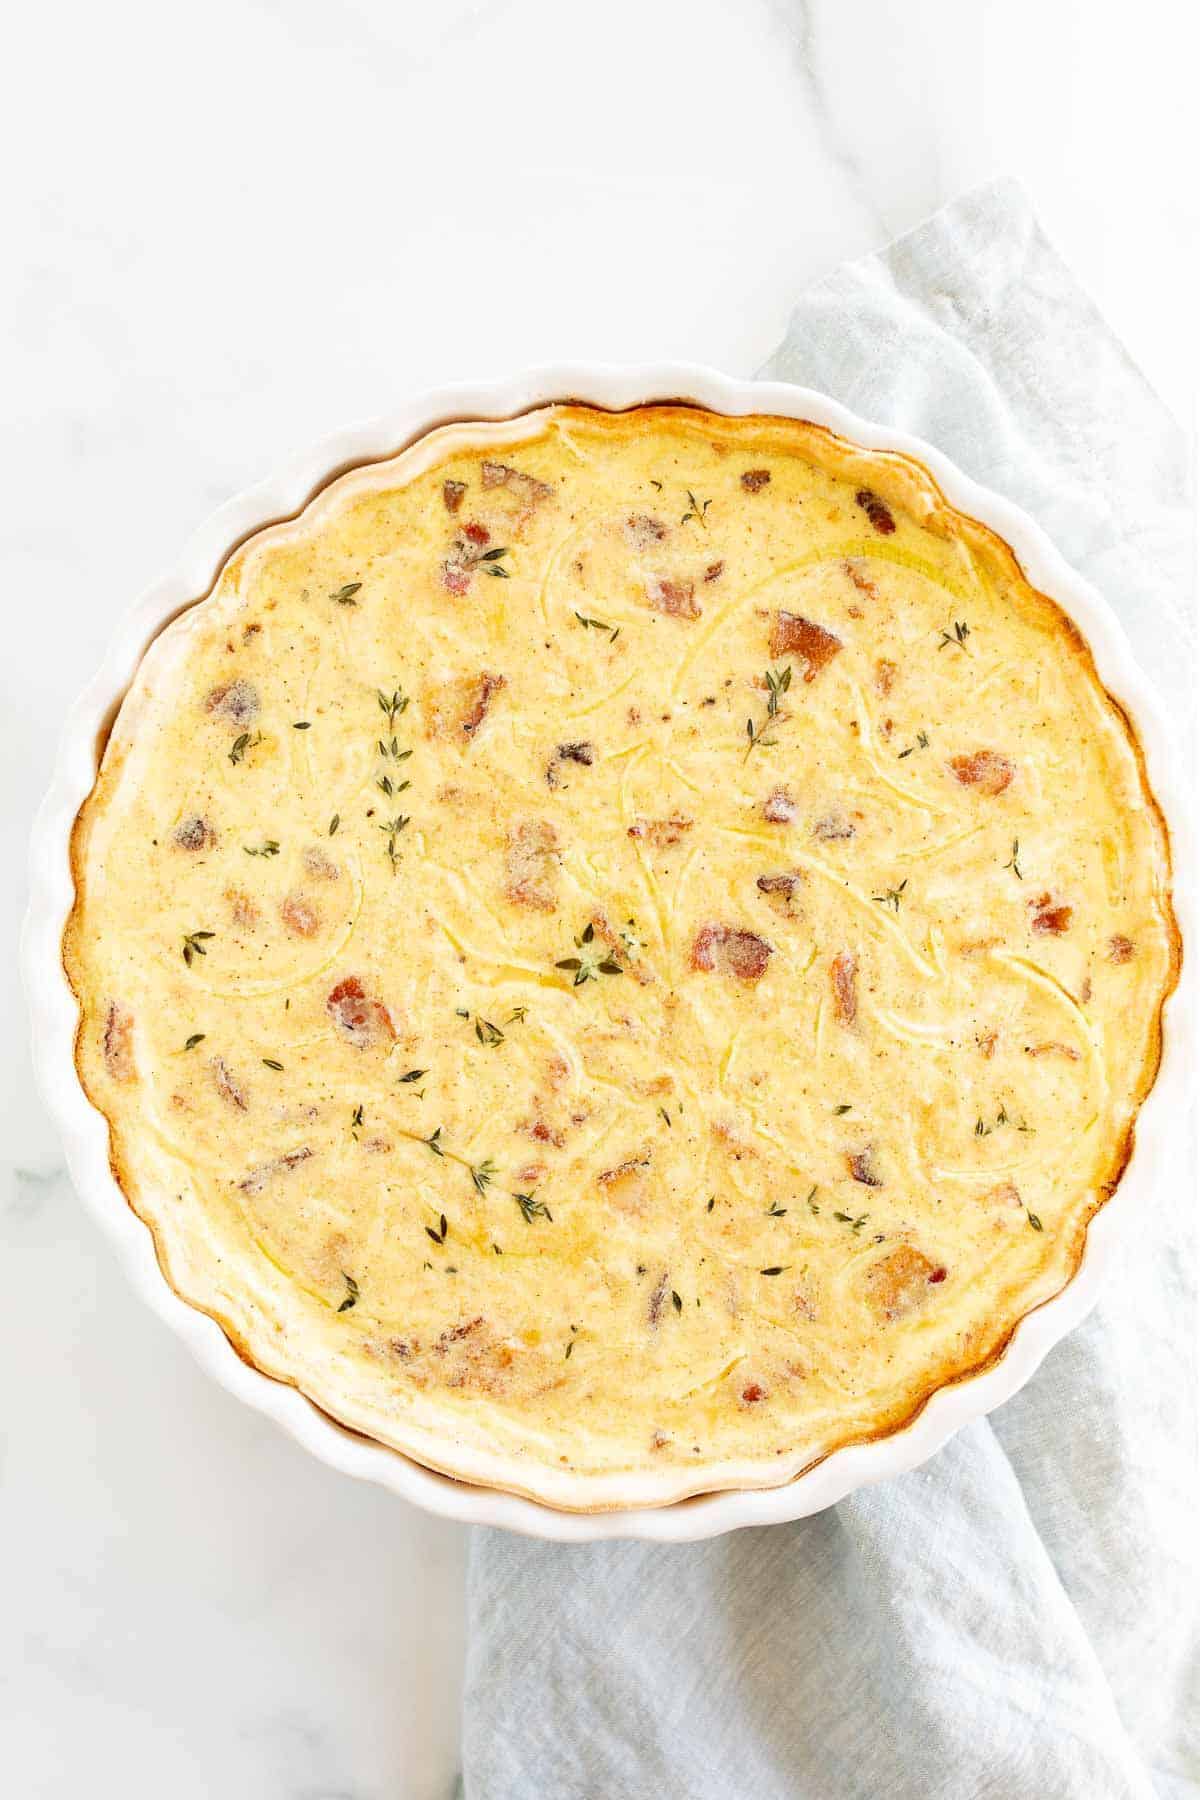 A quiche lorraine baked into a white tart pan, resting on a marble surface.